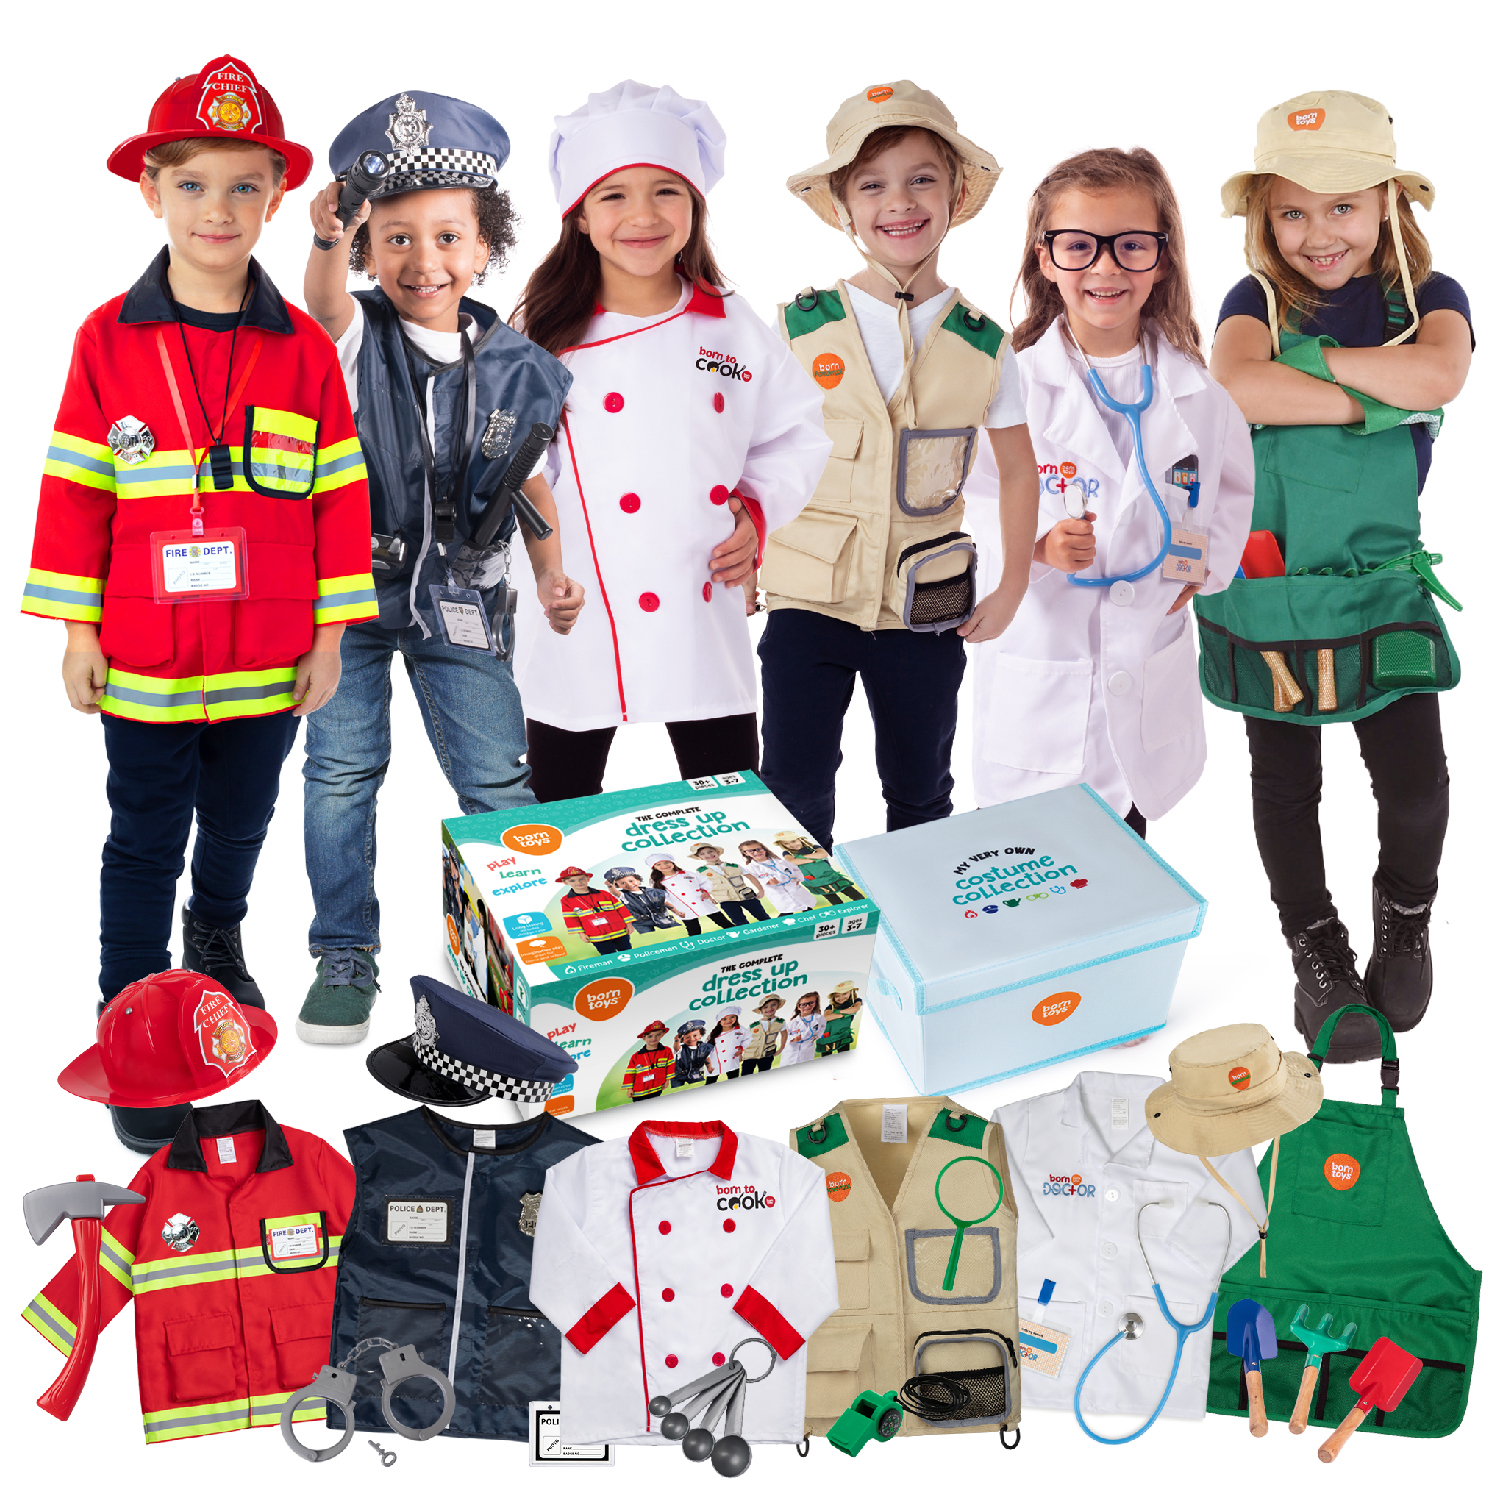 Bintiva Dress Up / Drama Play Deluxe Trunk 6 In 1 Set image number null